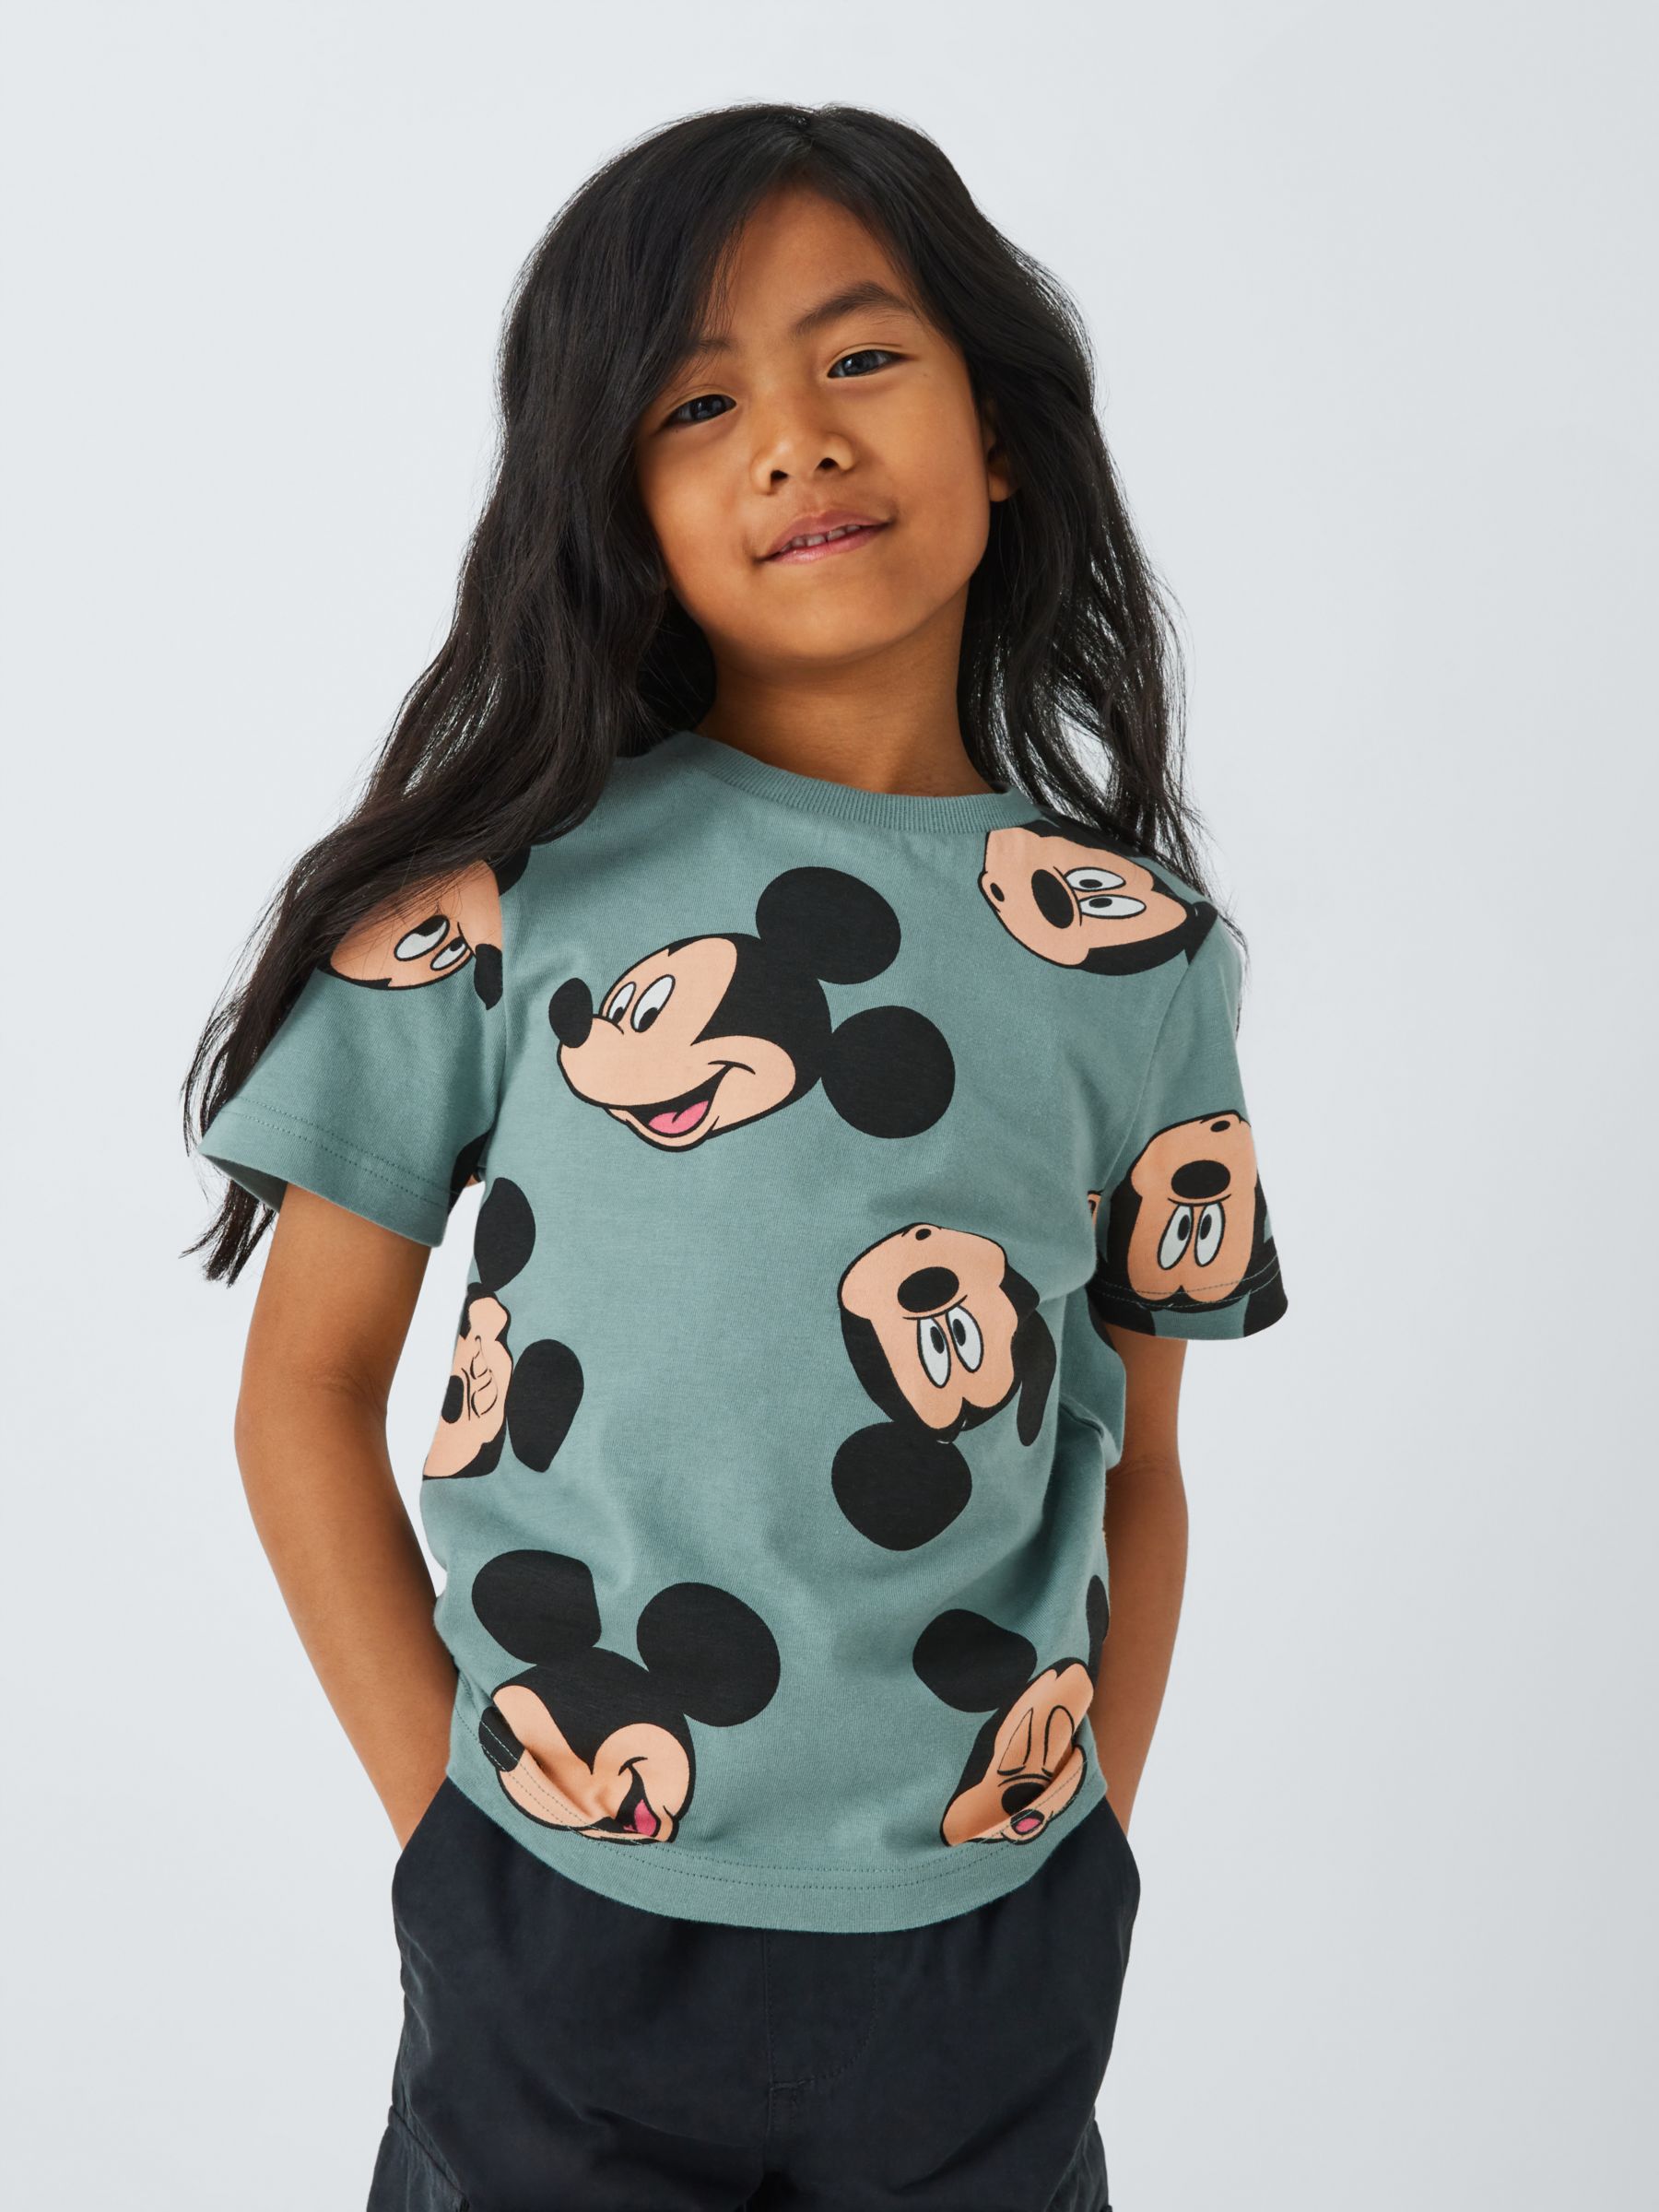 Brand Threads Kids' Disney Mickey Mouse T-Shirt, Green, 4-5 years